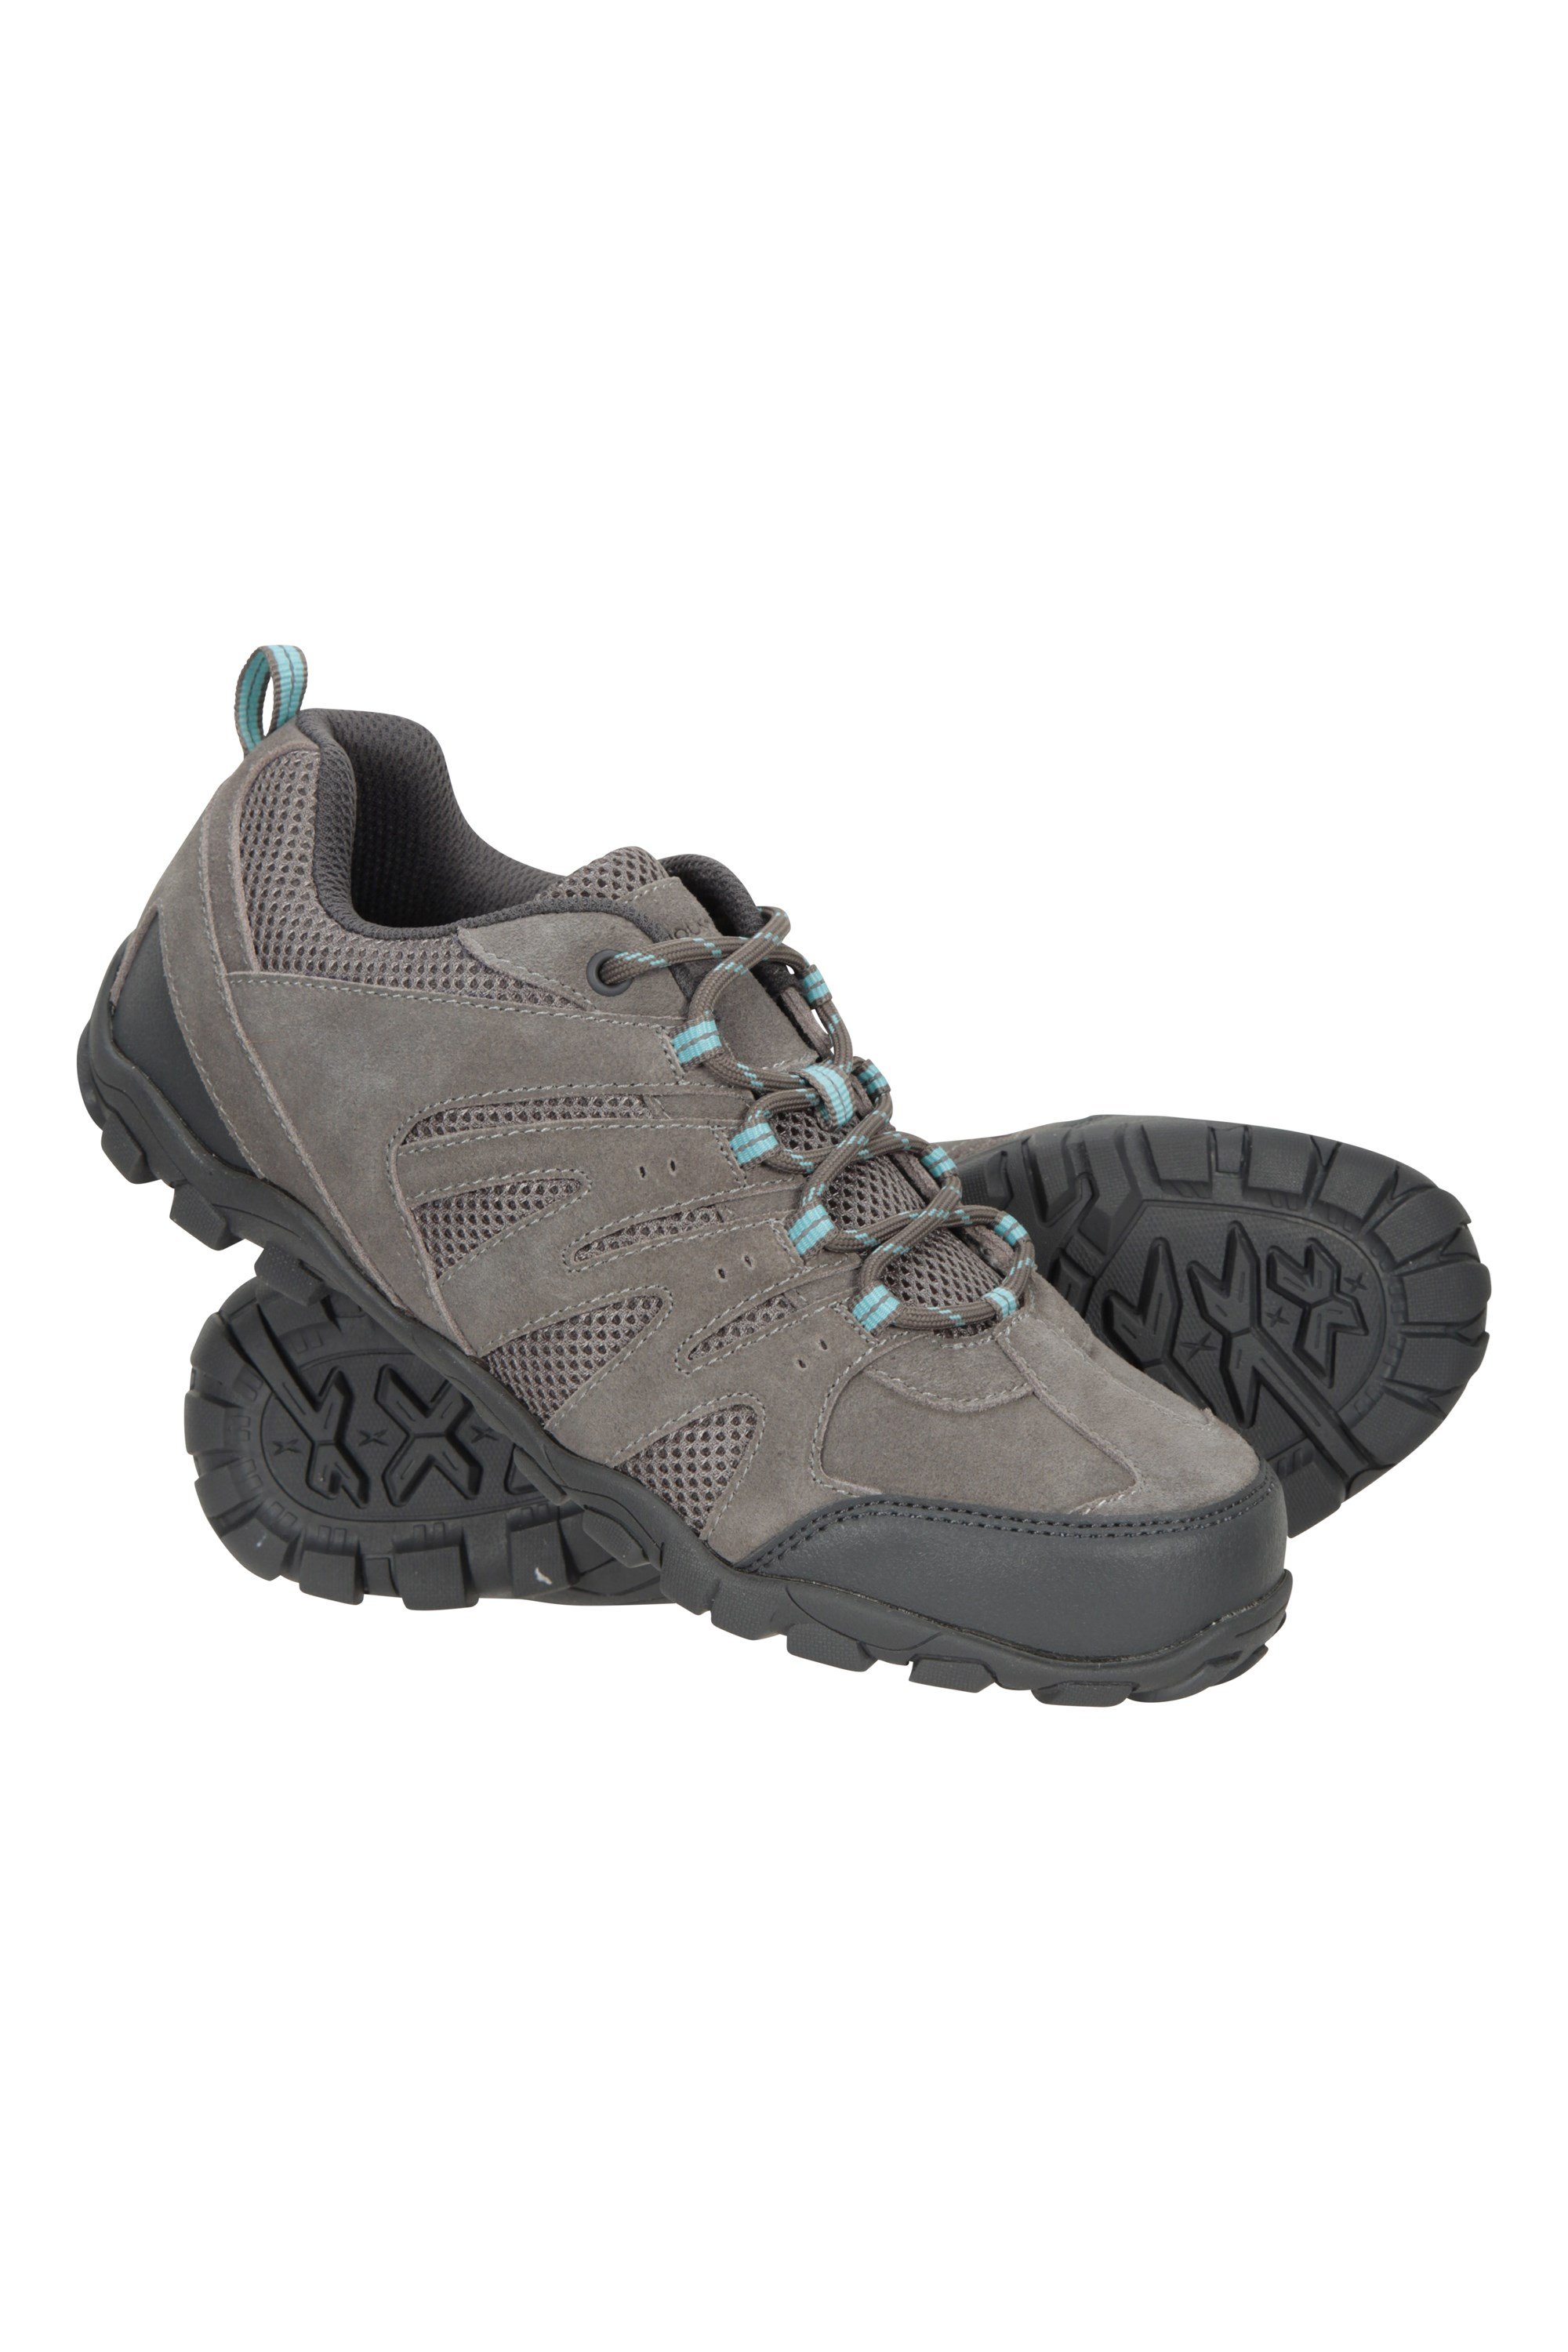 Best Walking Shoes For Women 2023 - Forbes Vetted